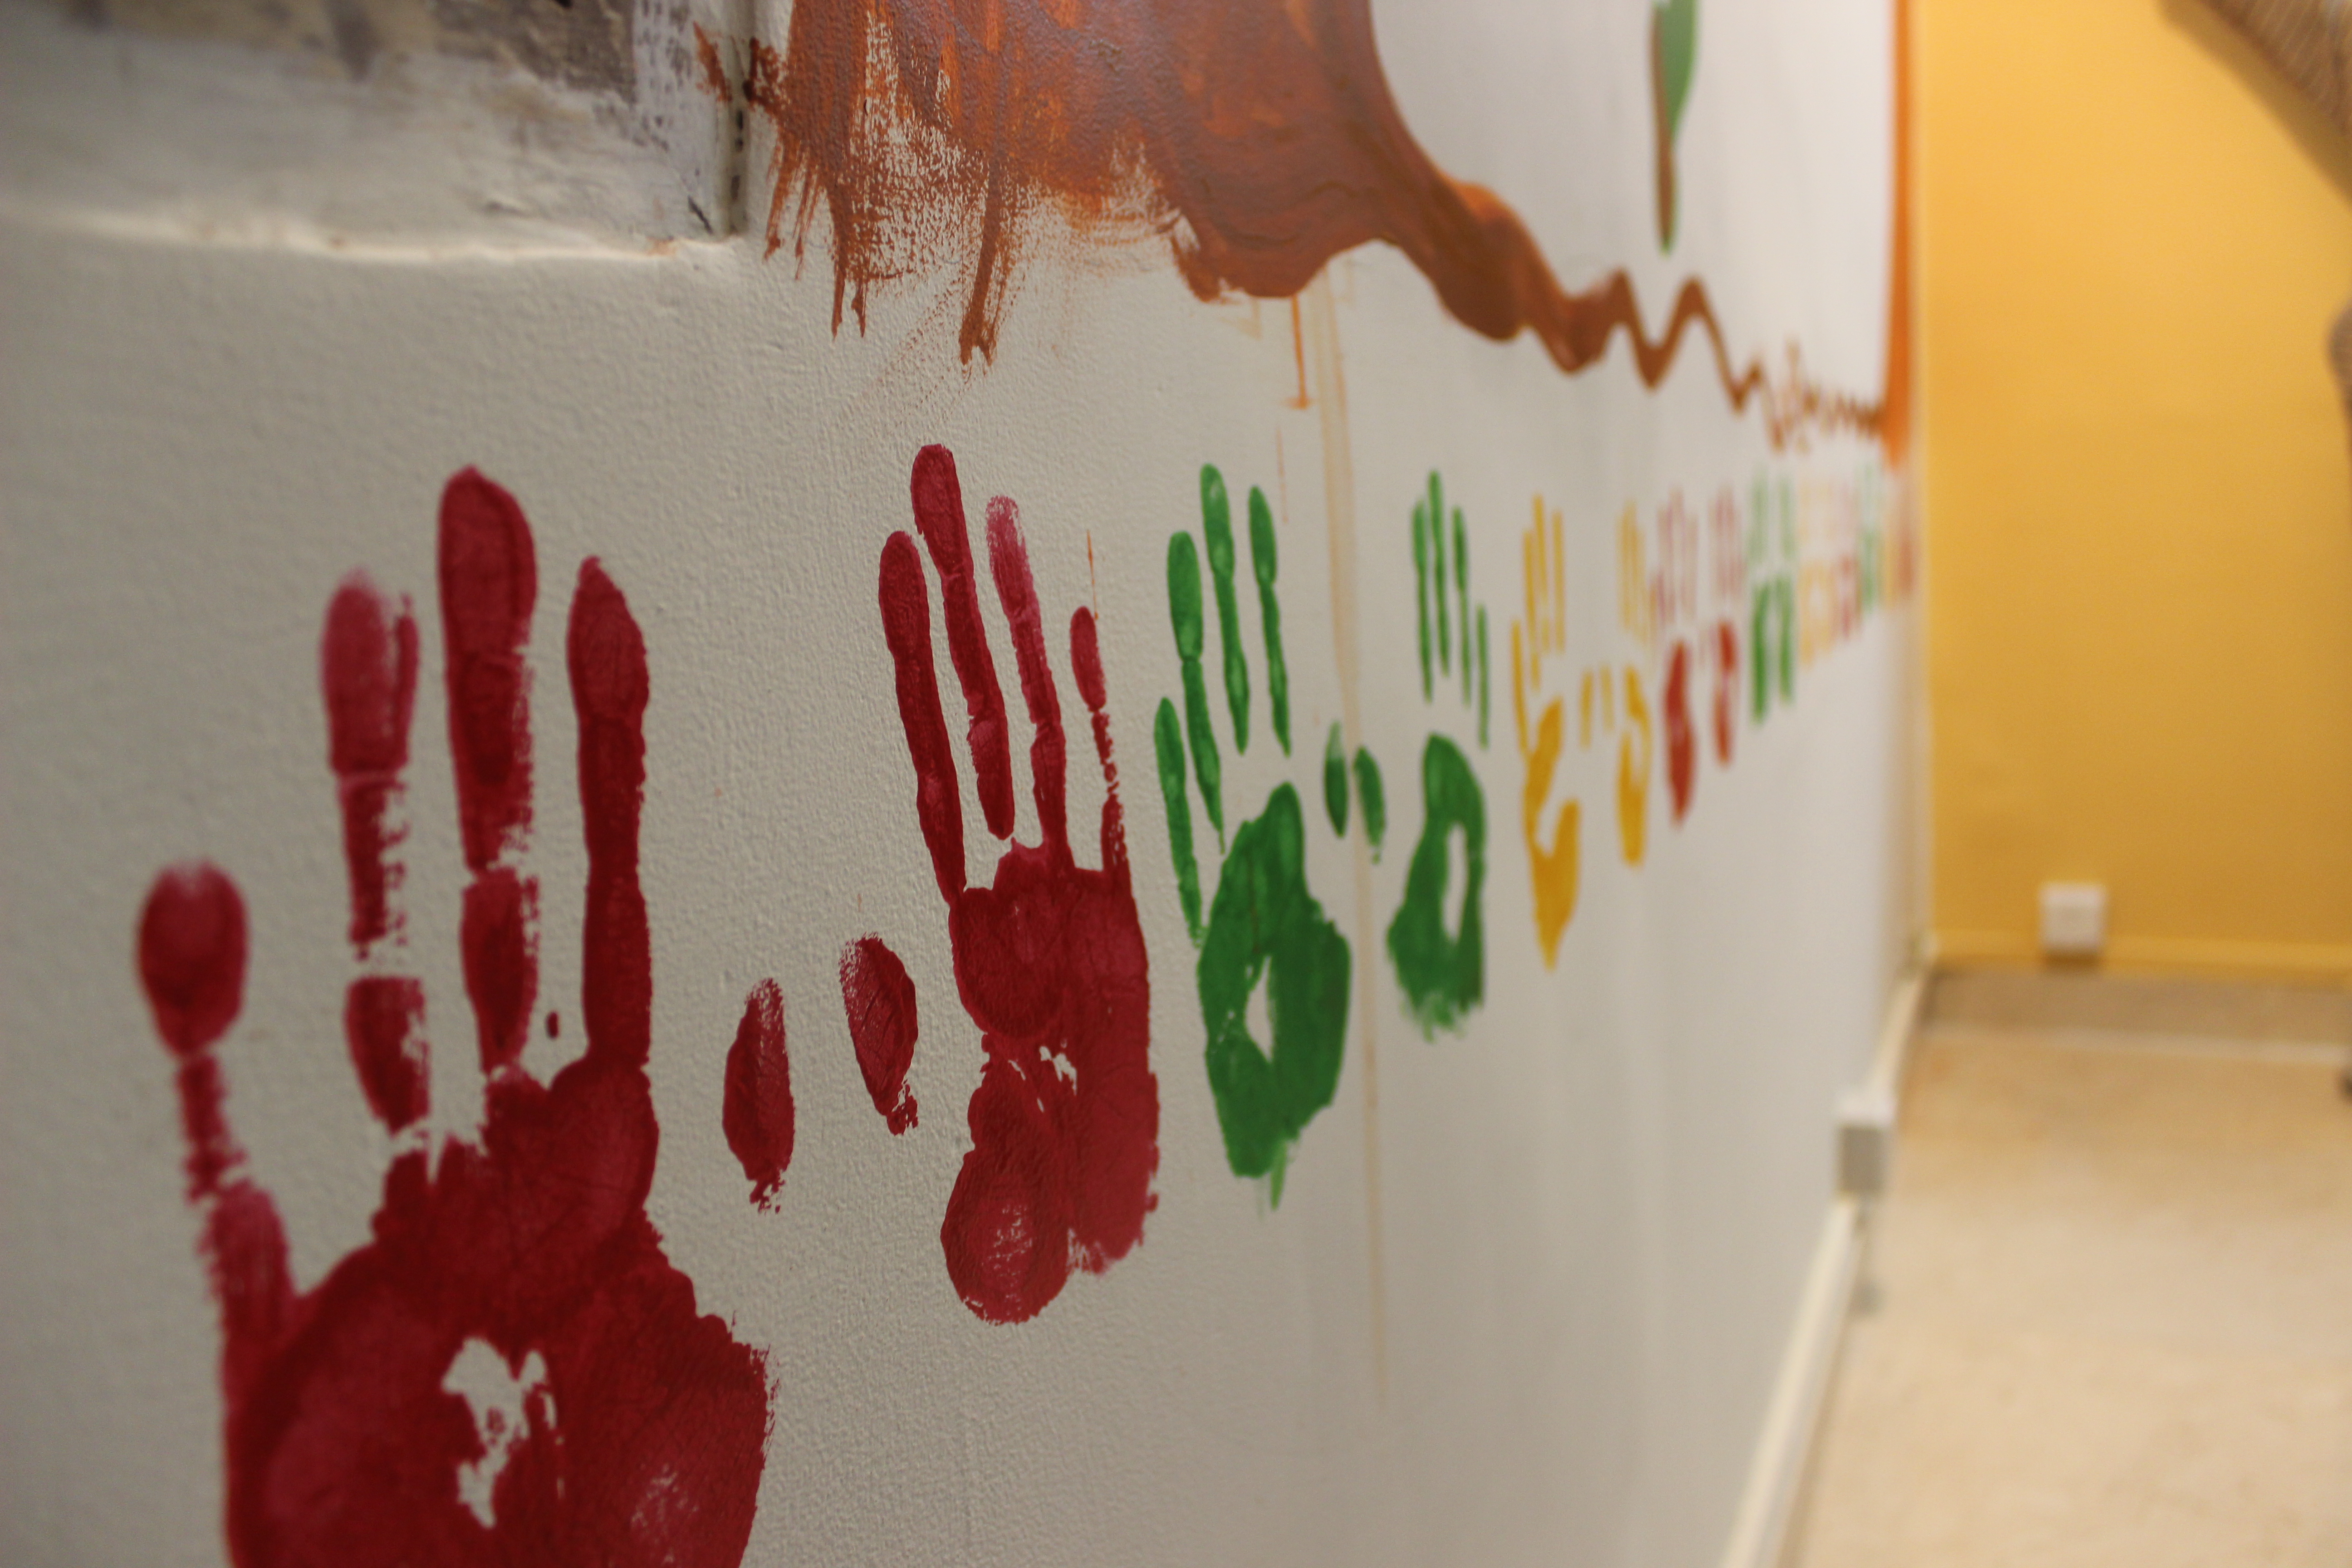 All the fellow wanted their hand prints.